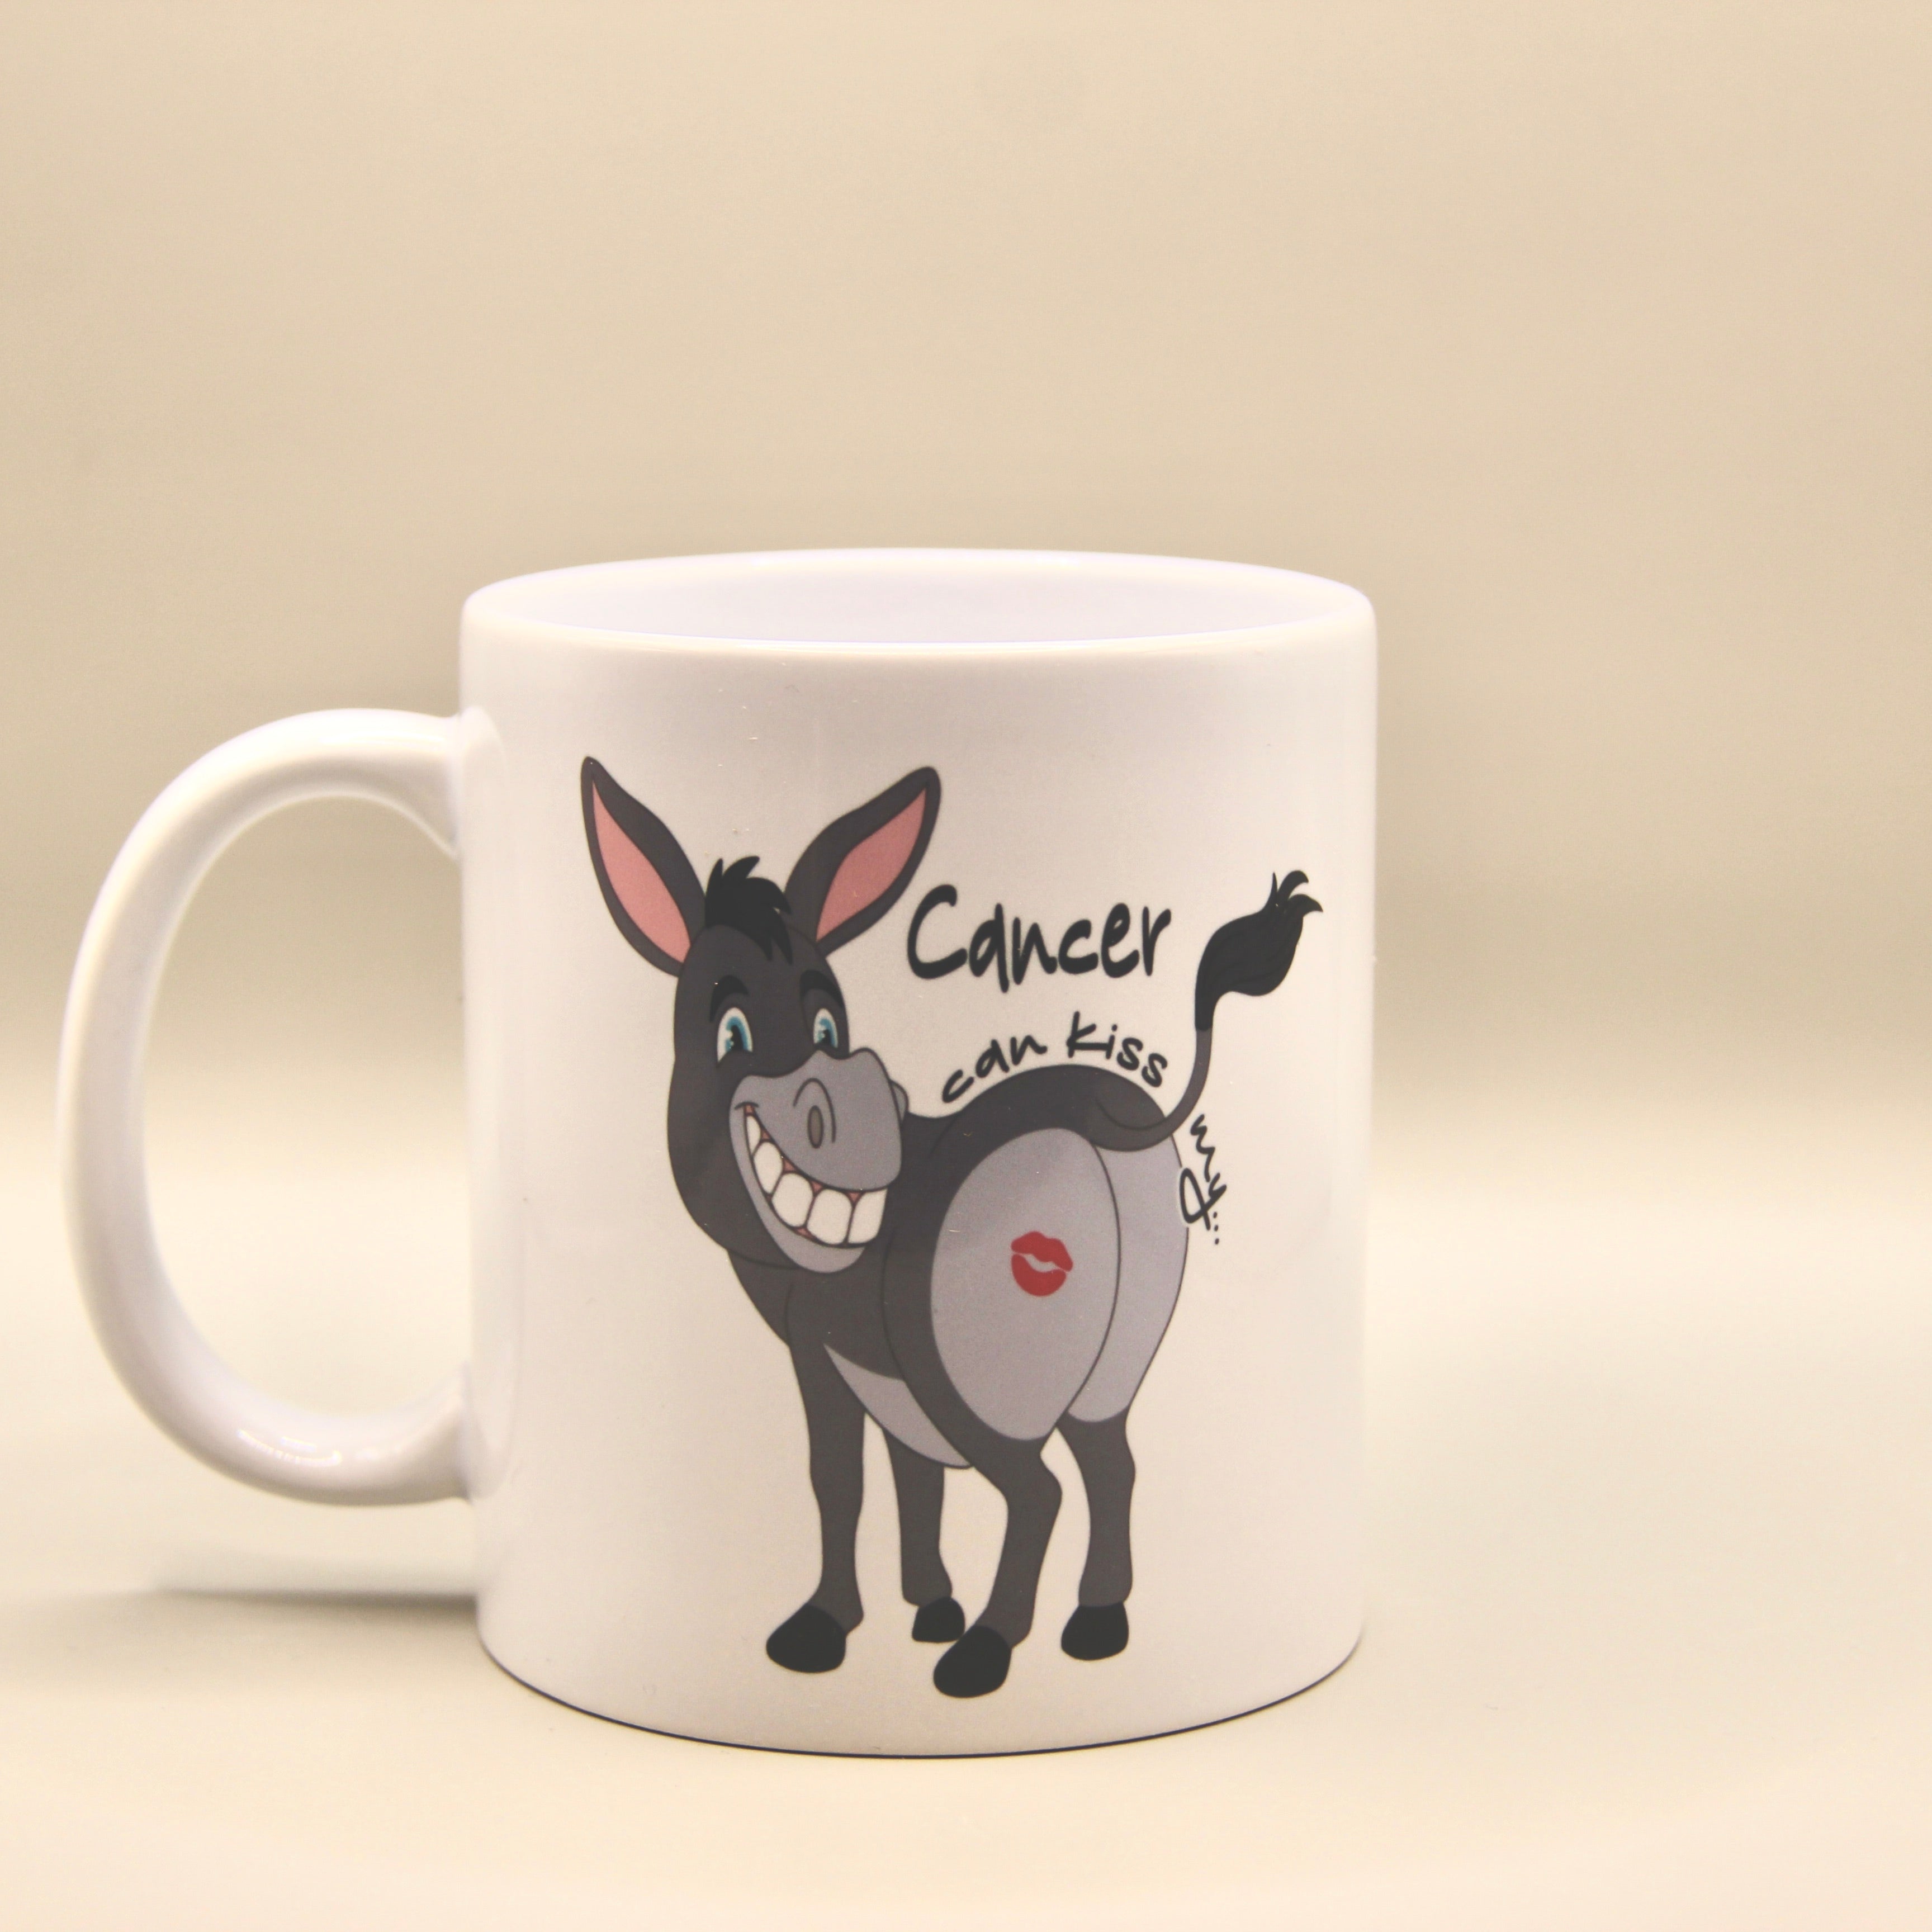 Cancer can kiss my…. - Funny Cancer Get Well Mug